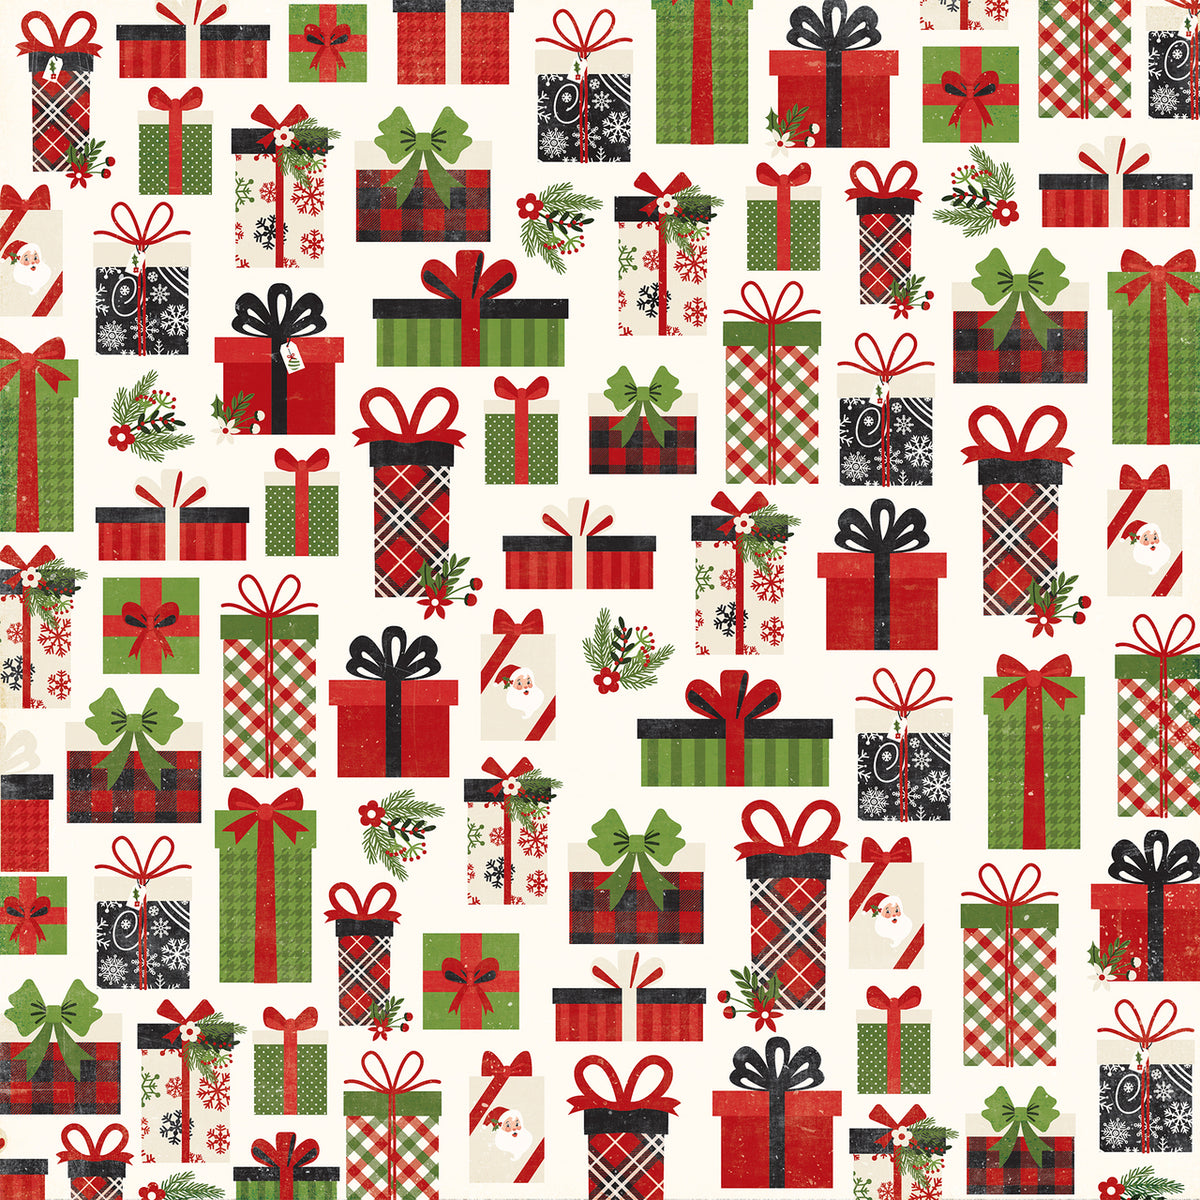 12x12 patterned cardstock depicting presents with Christmas wrapping from Echo Park Paper